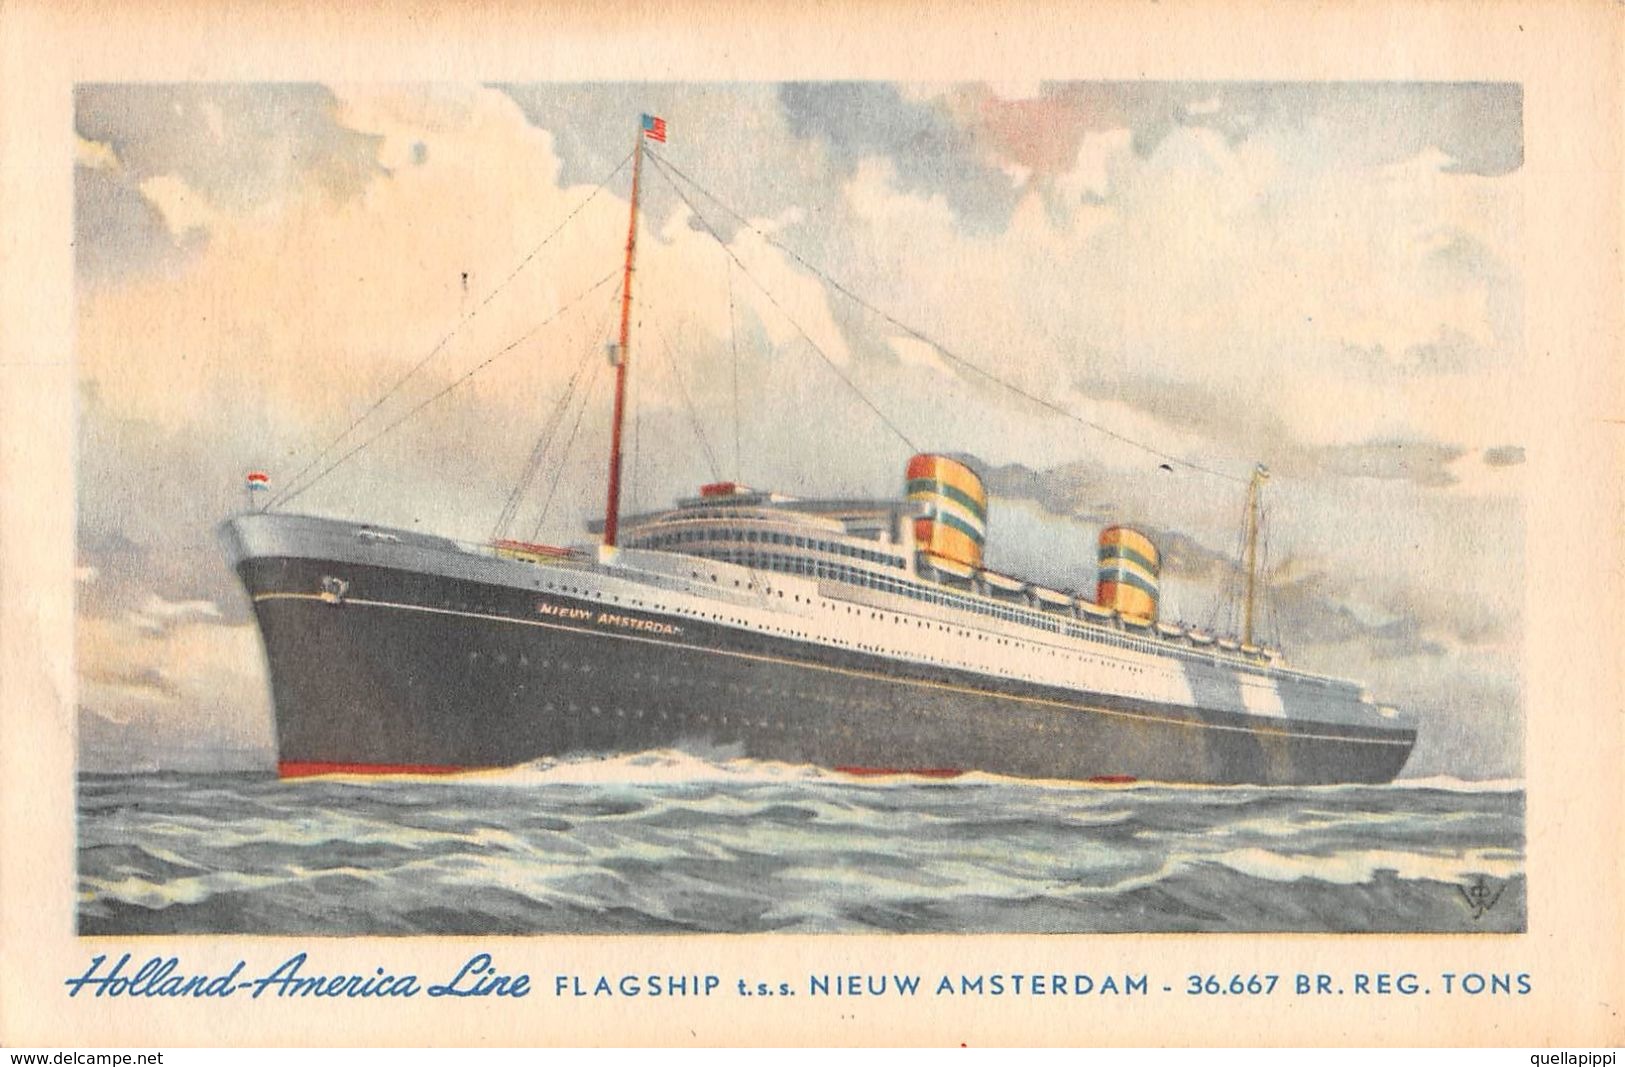 07194 "HOLLAND-AMERICA LINE - FLAGSHIP T.S.S. NIEUW AMSTERDAM - 36.667 BR. REG. TONS" CART. NON SPED - Banks